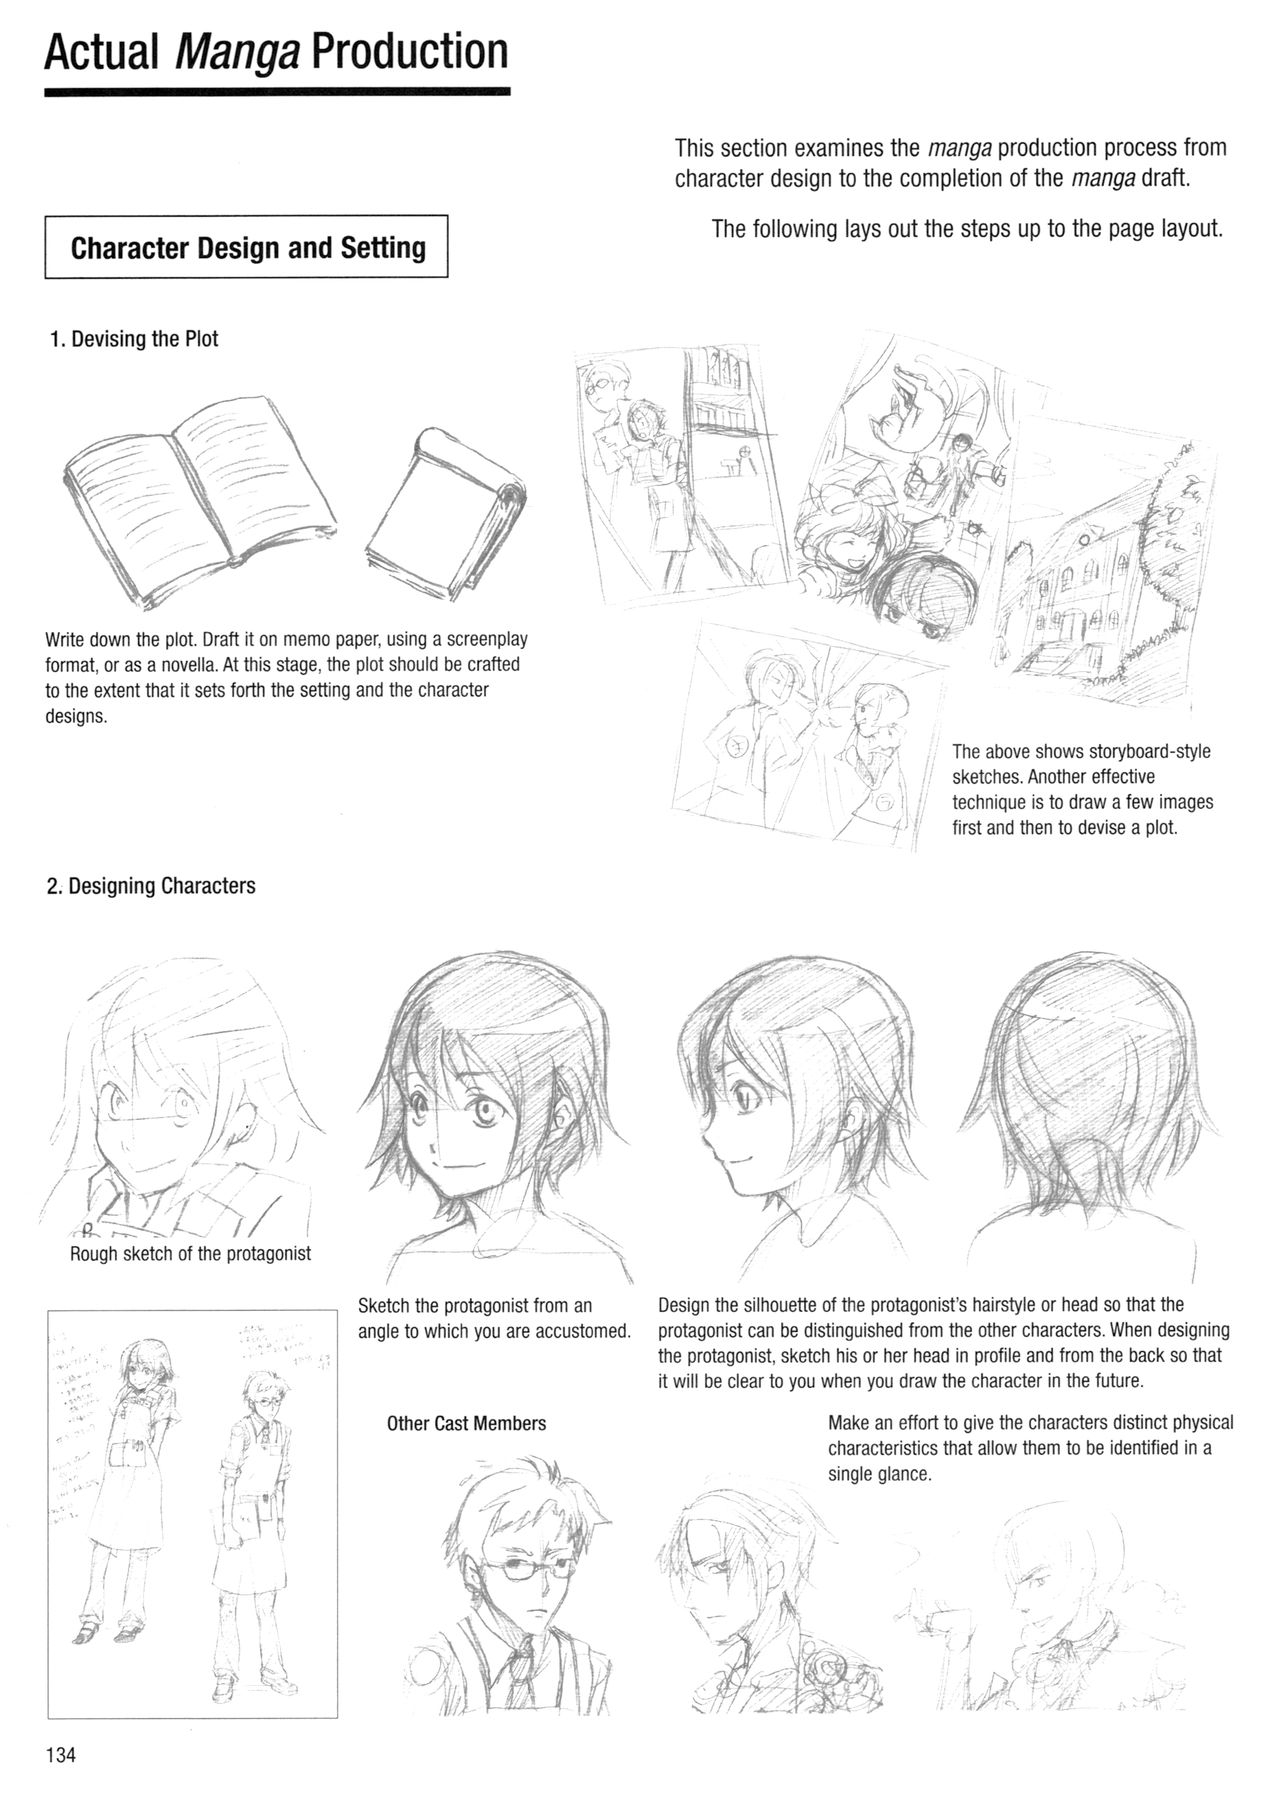 Sketching Manga-Style Vol. 3 - Unforgettable Characters 133